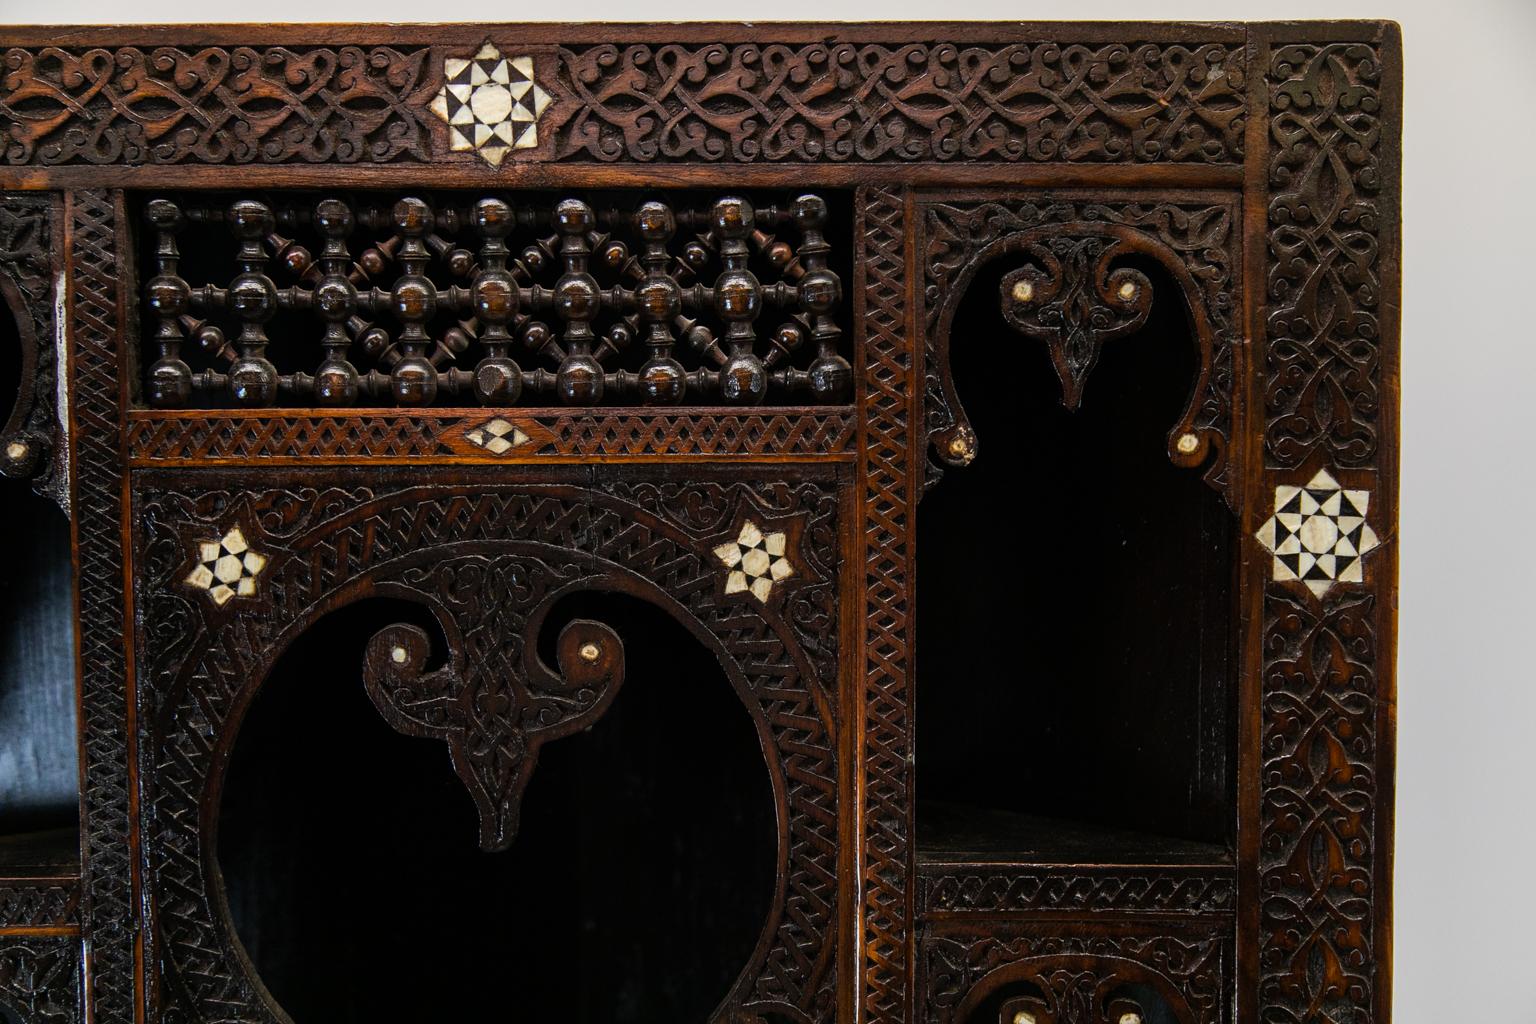 Moroccan inlaid corner cupboard, the front and shelves are profusely carved with geometric and stylized arabesque designs. It is inlaid with mother of pearl stars, diamonds, and circles. There are twelve arched openings which have pendant spearheads